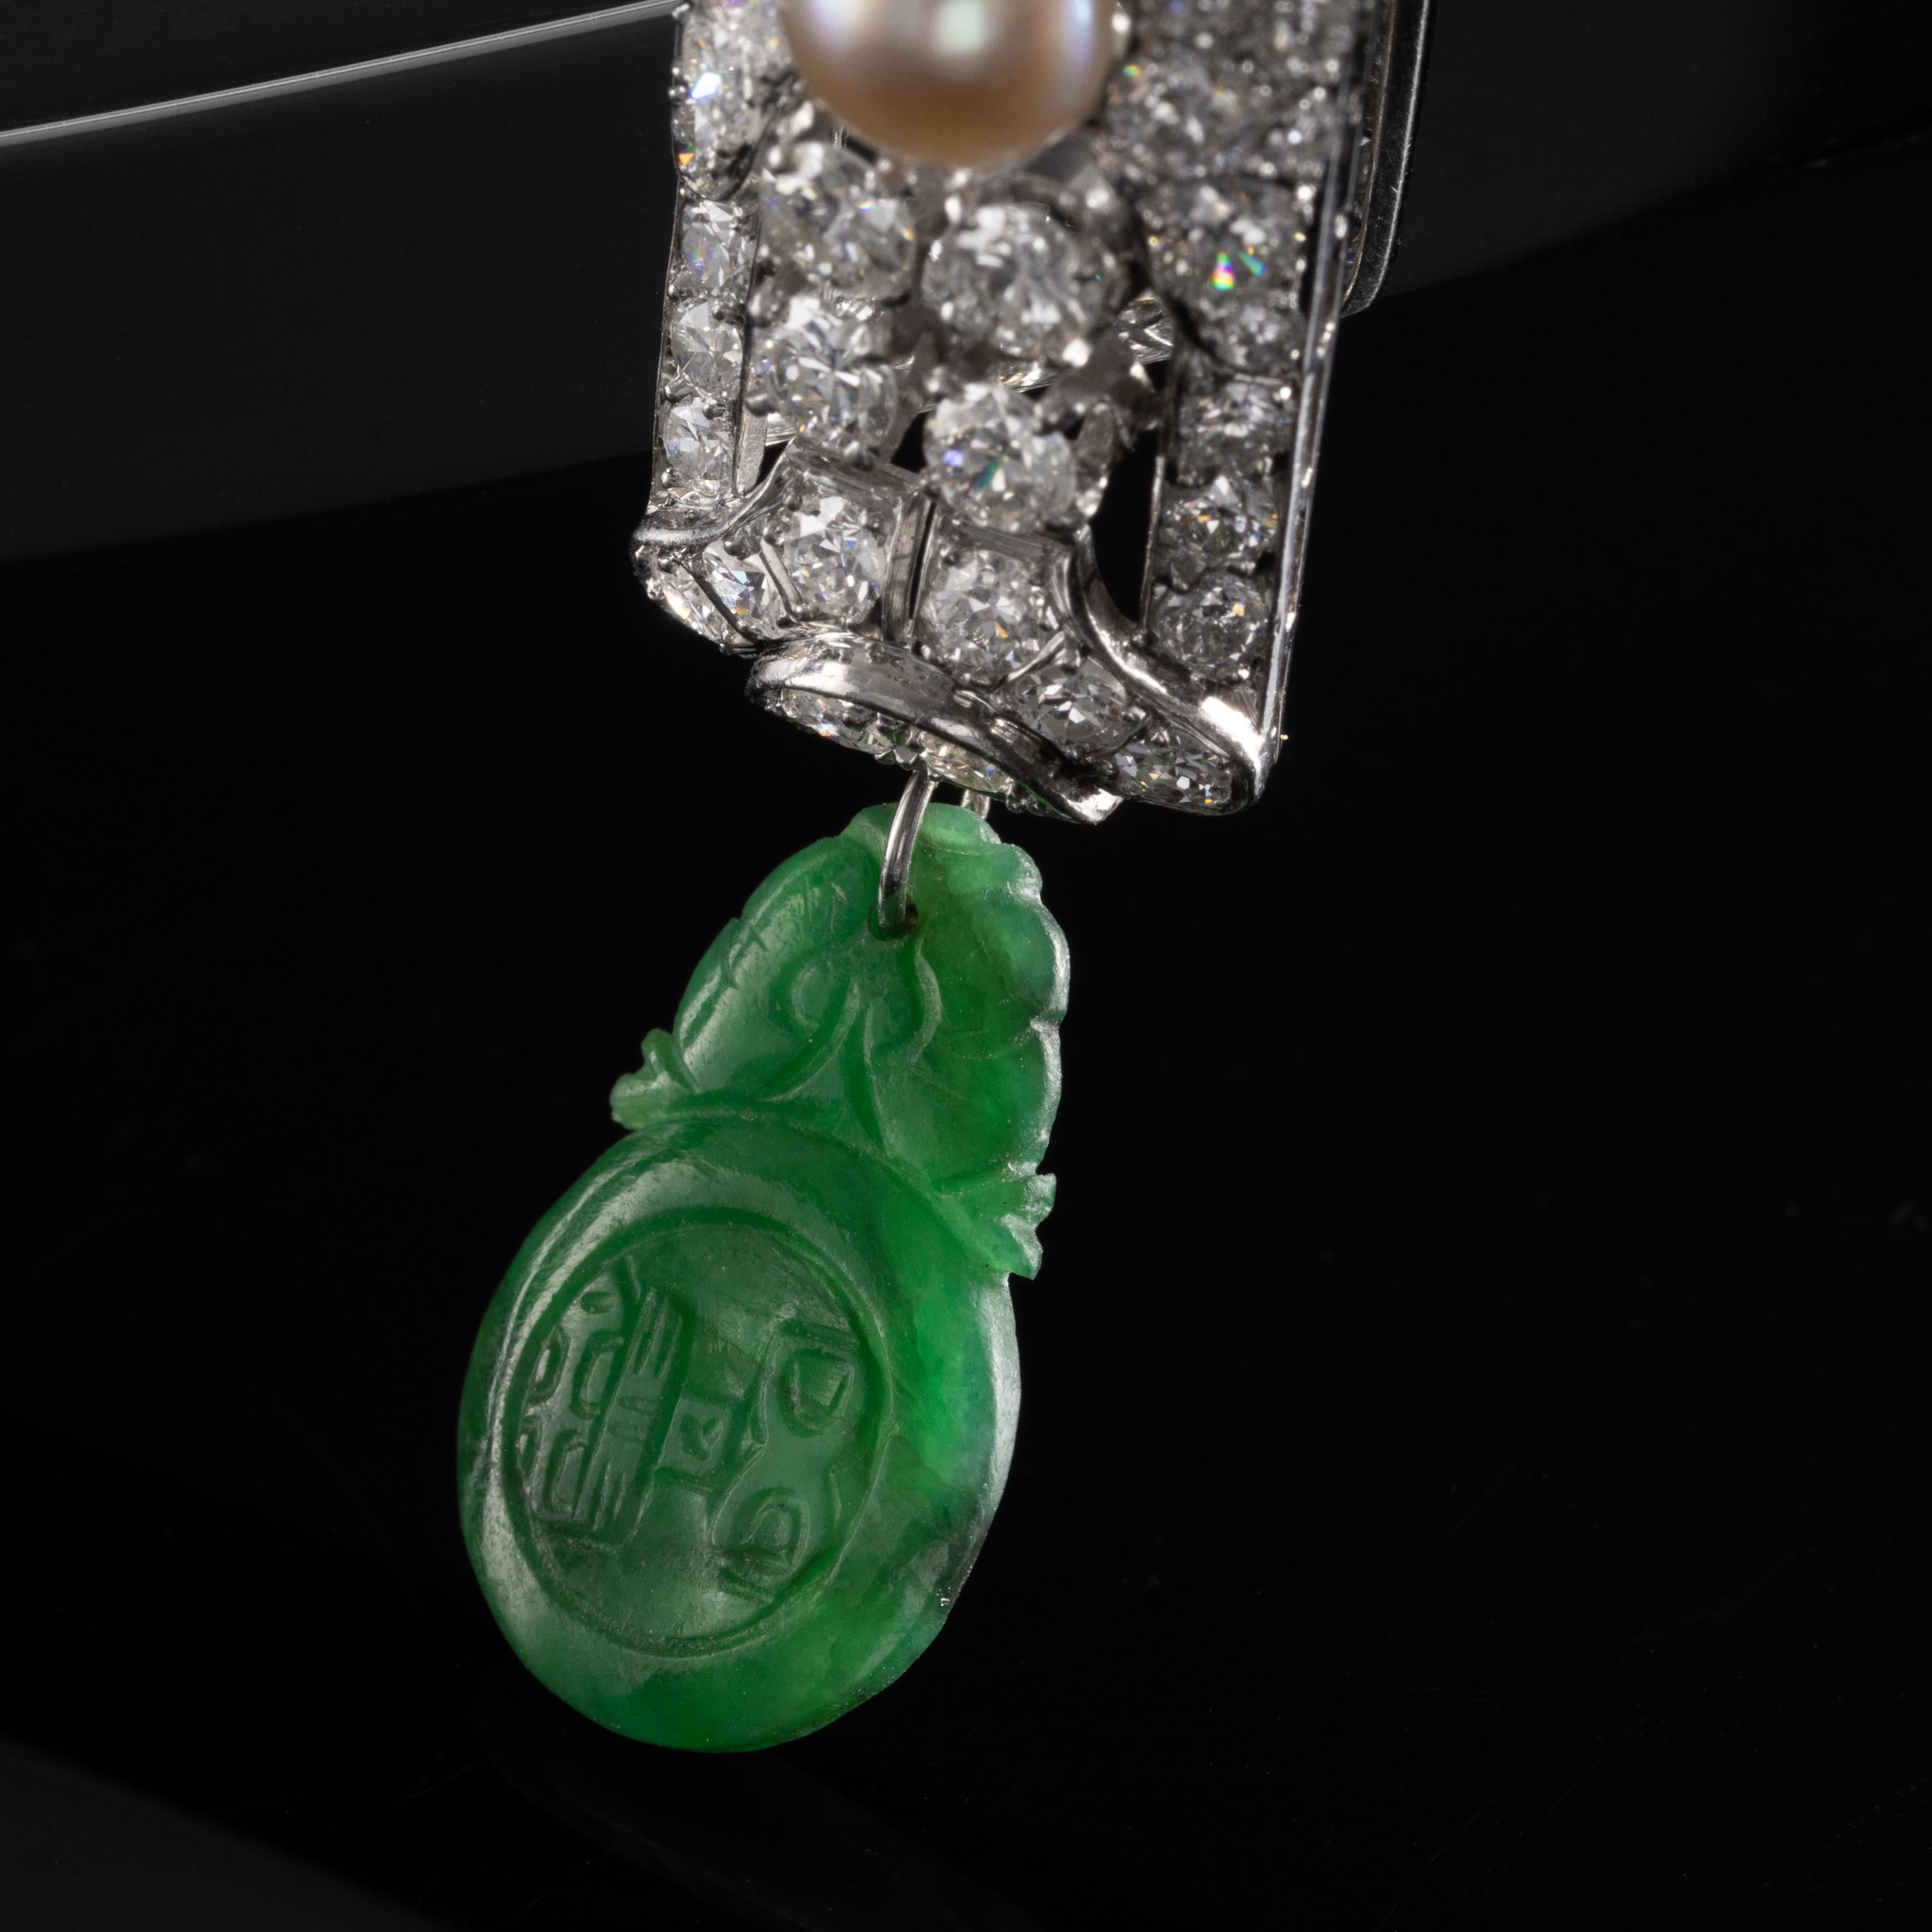 This Art Deco pendant necklace —ablaze in old diamonds— features two of the rarest and most precious gems on earth: natural pearl and natural, untreated jadeite jade. The sleek and permanently-stylish platinum Art Deco jewel is composed of two